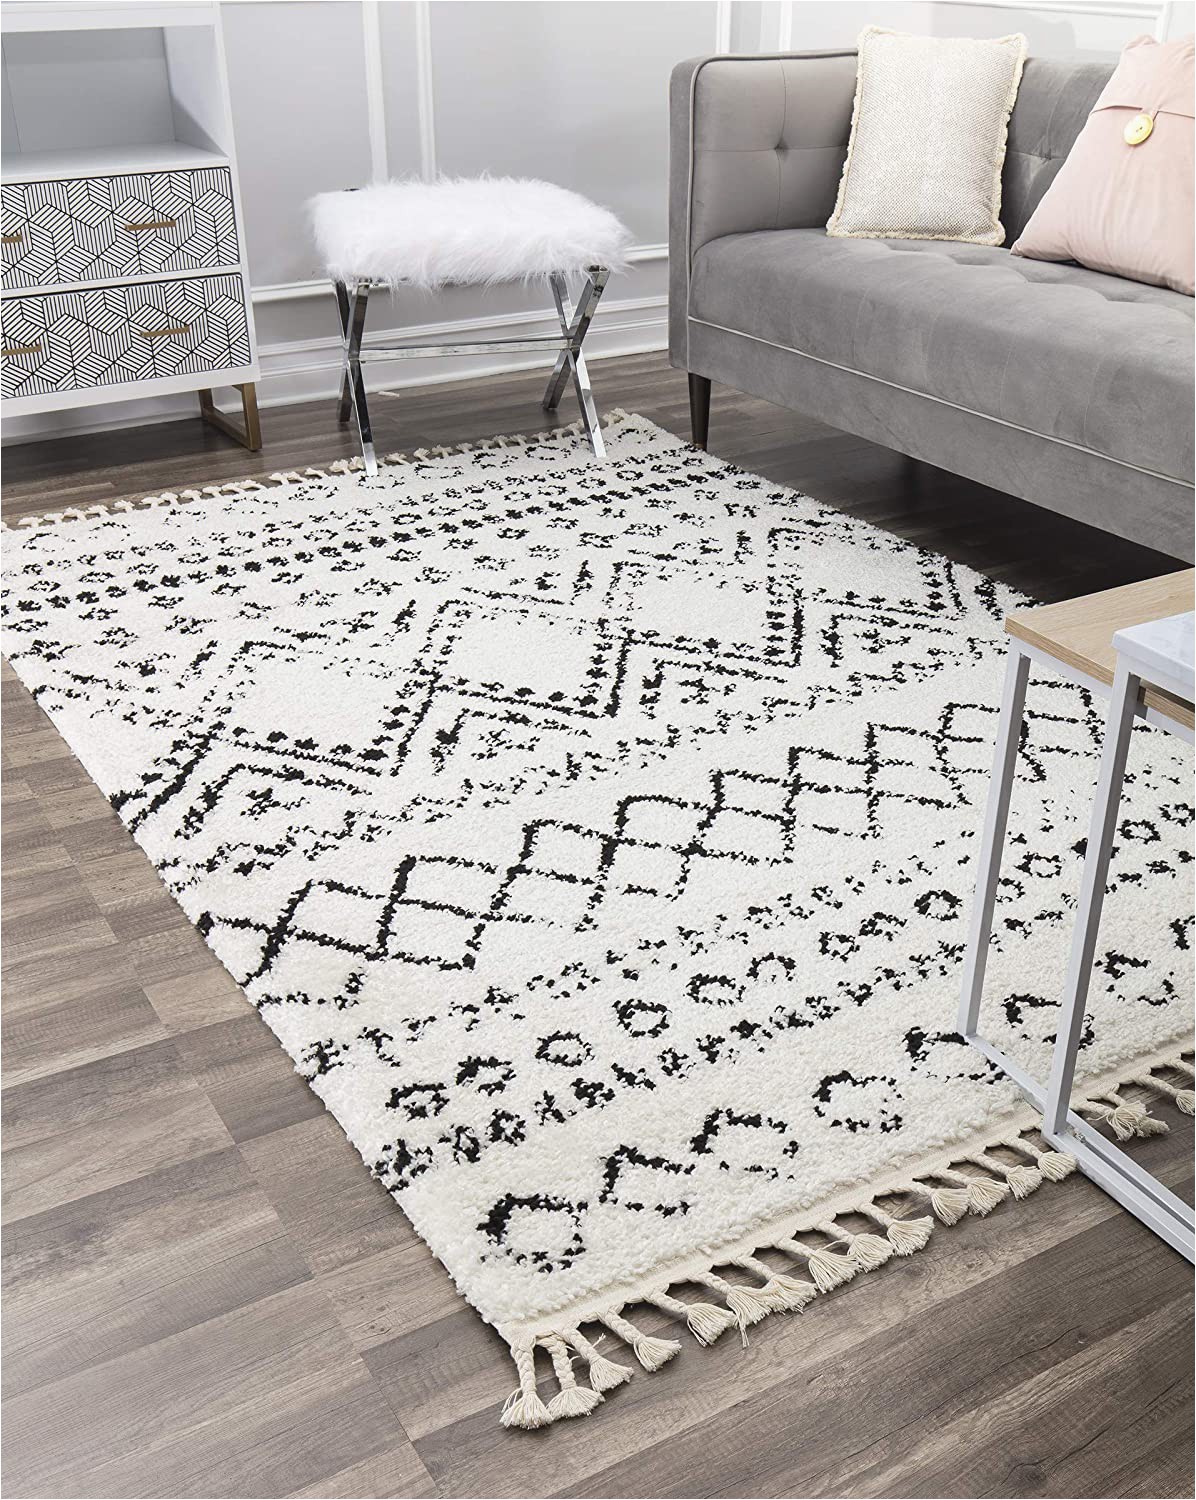 Buy now Pay Later area Rugs Amazon Cosmoliving by Cosmopolitan Wisp area Rug 8 0